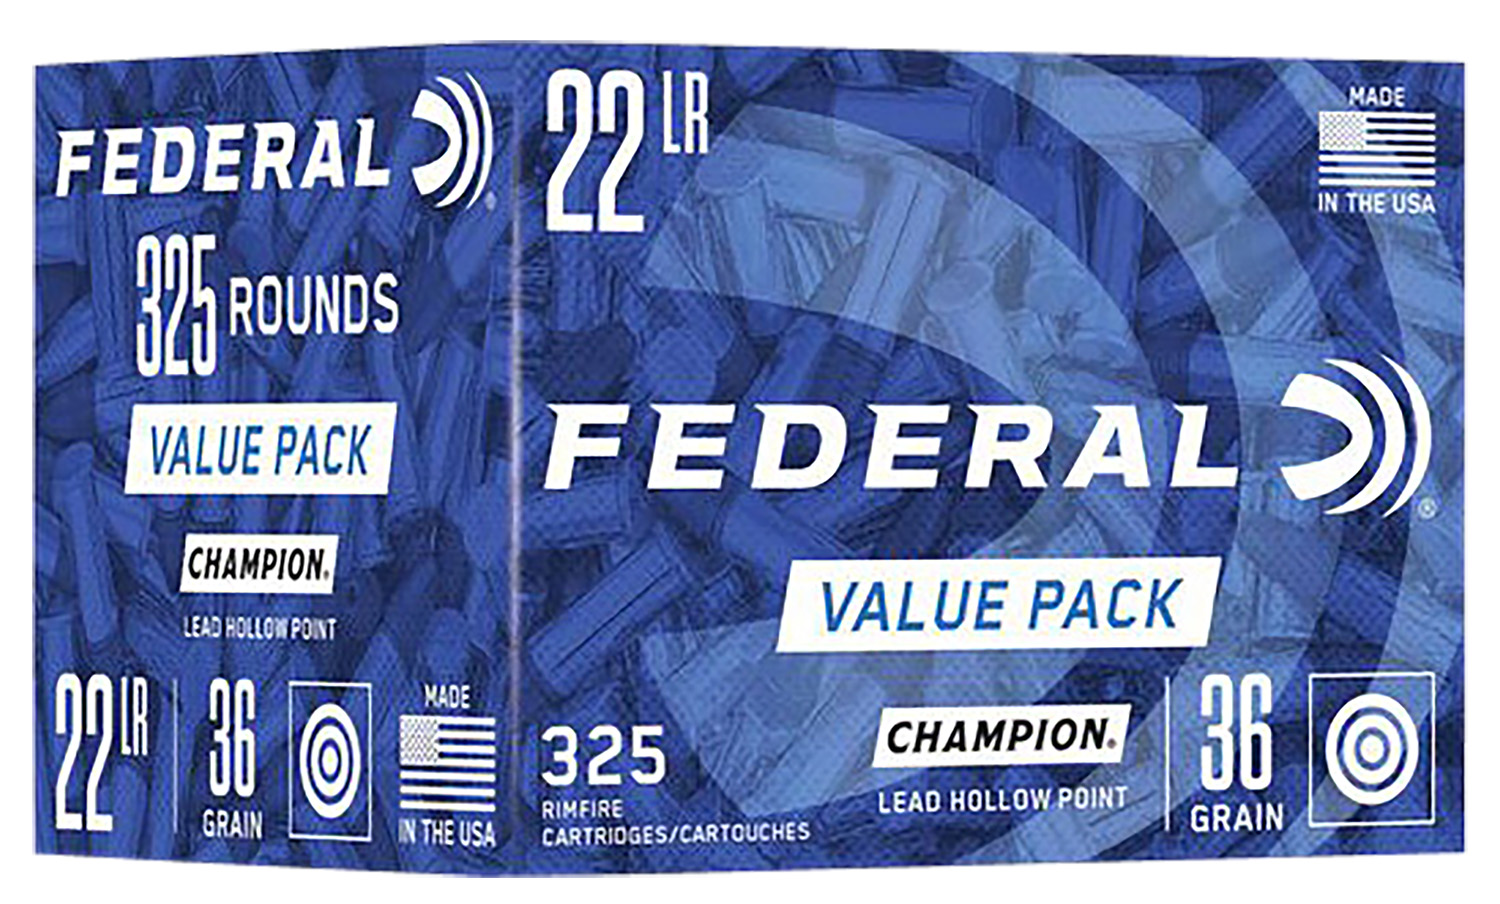 Federal 749 Champion Training Value Pack 22 LR 36 gr Lead Hollow Point 325 Per Box/ 10 Case